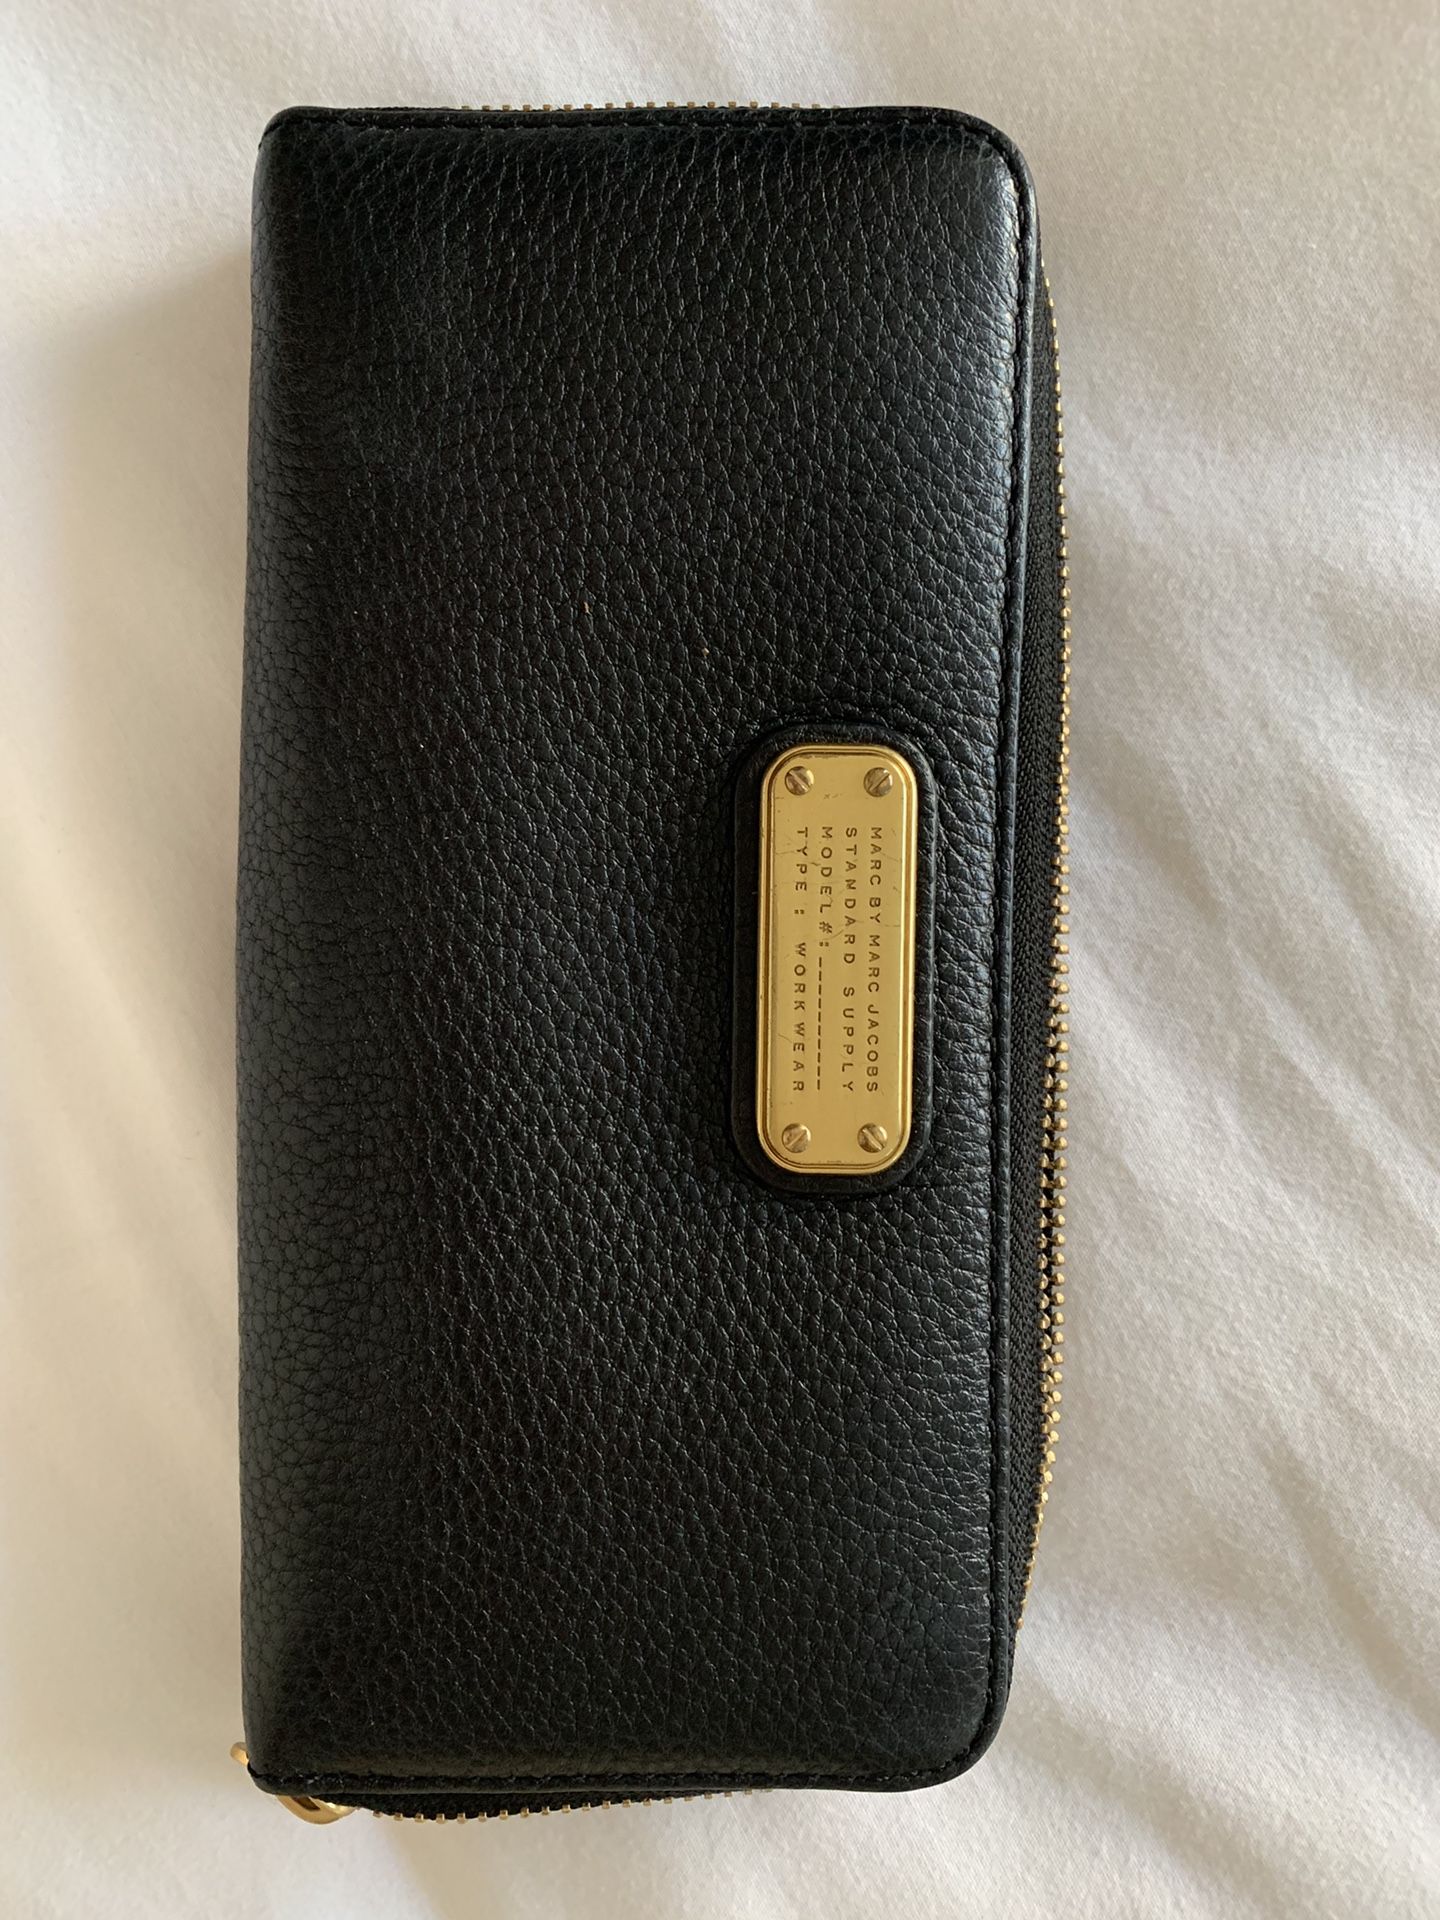 Marc Jacobs wallet!